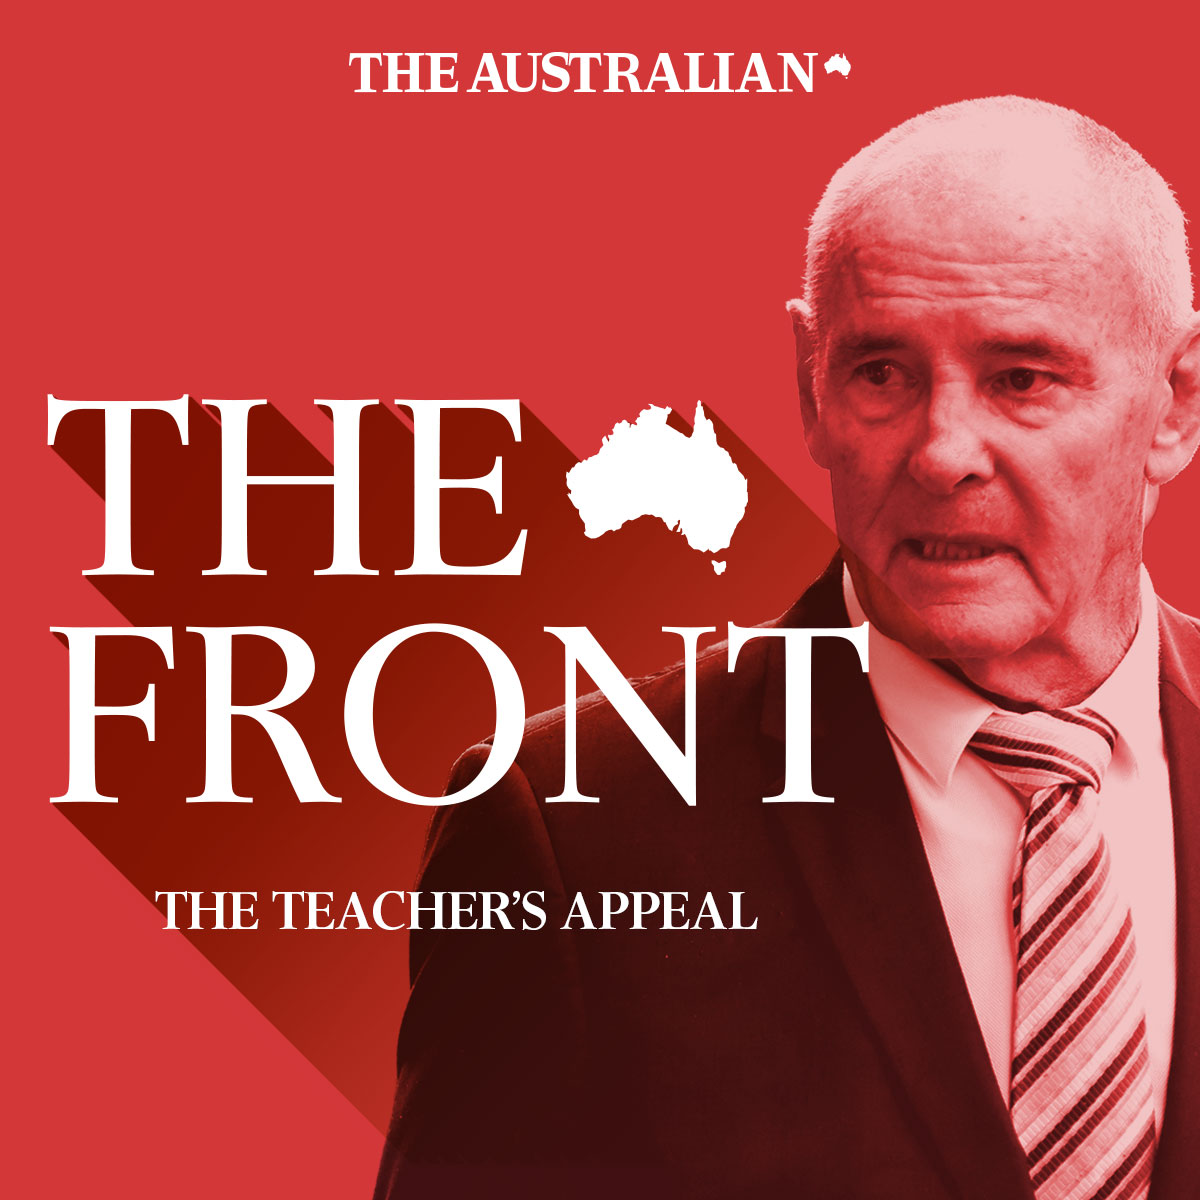 From The Front: The Teacher’s Appeal